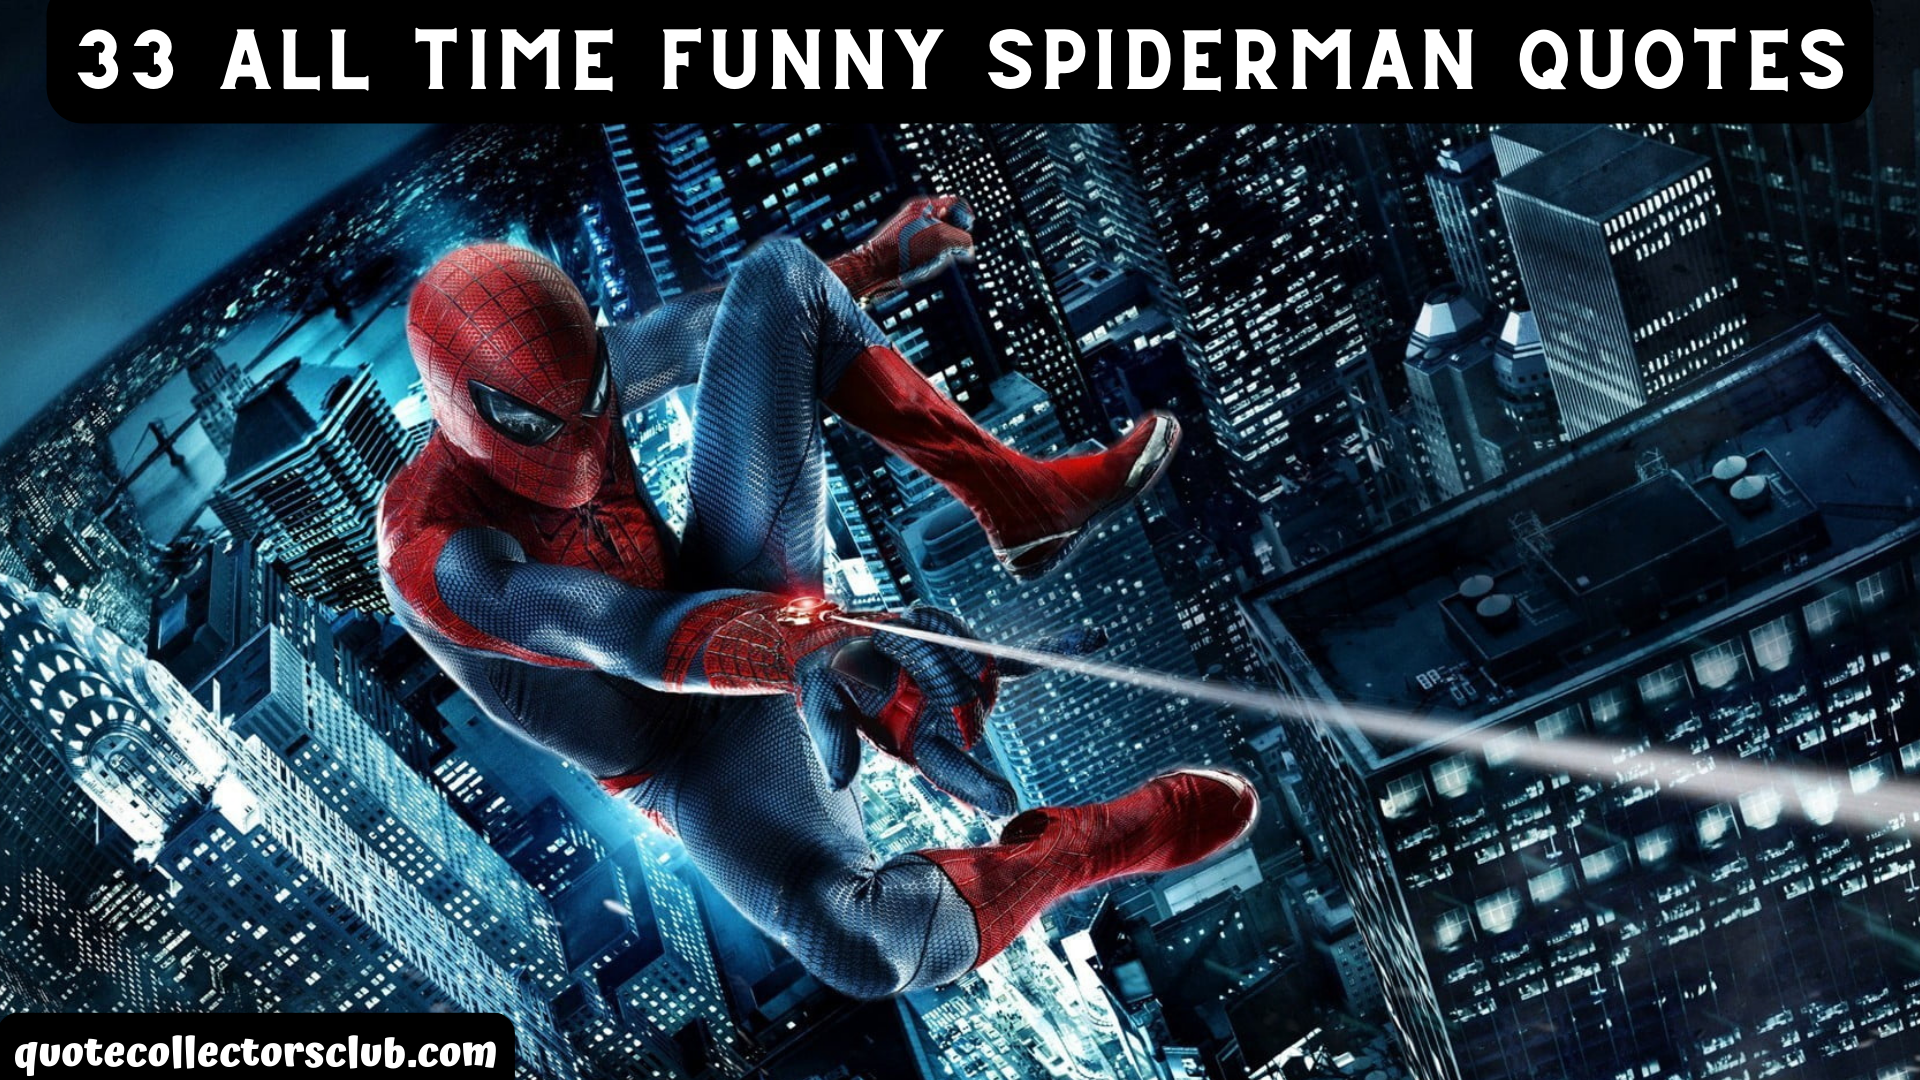 33 All Time Funny Spiderman Quotes - Quote Collectors Club